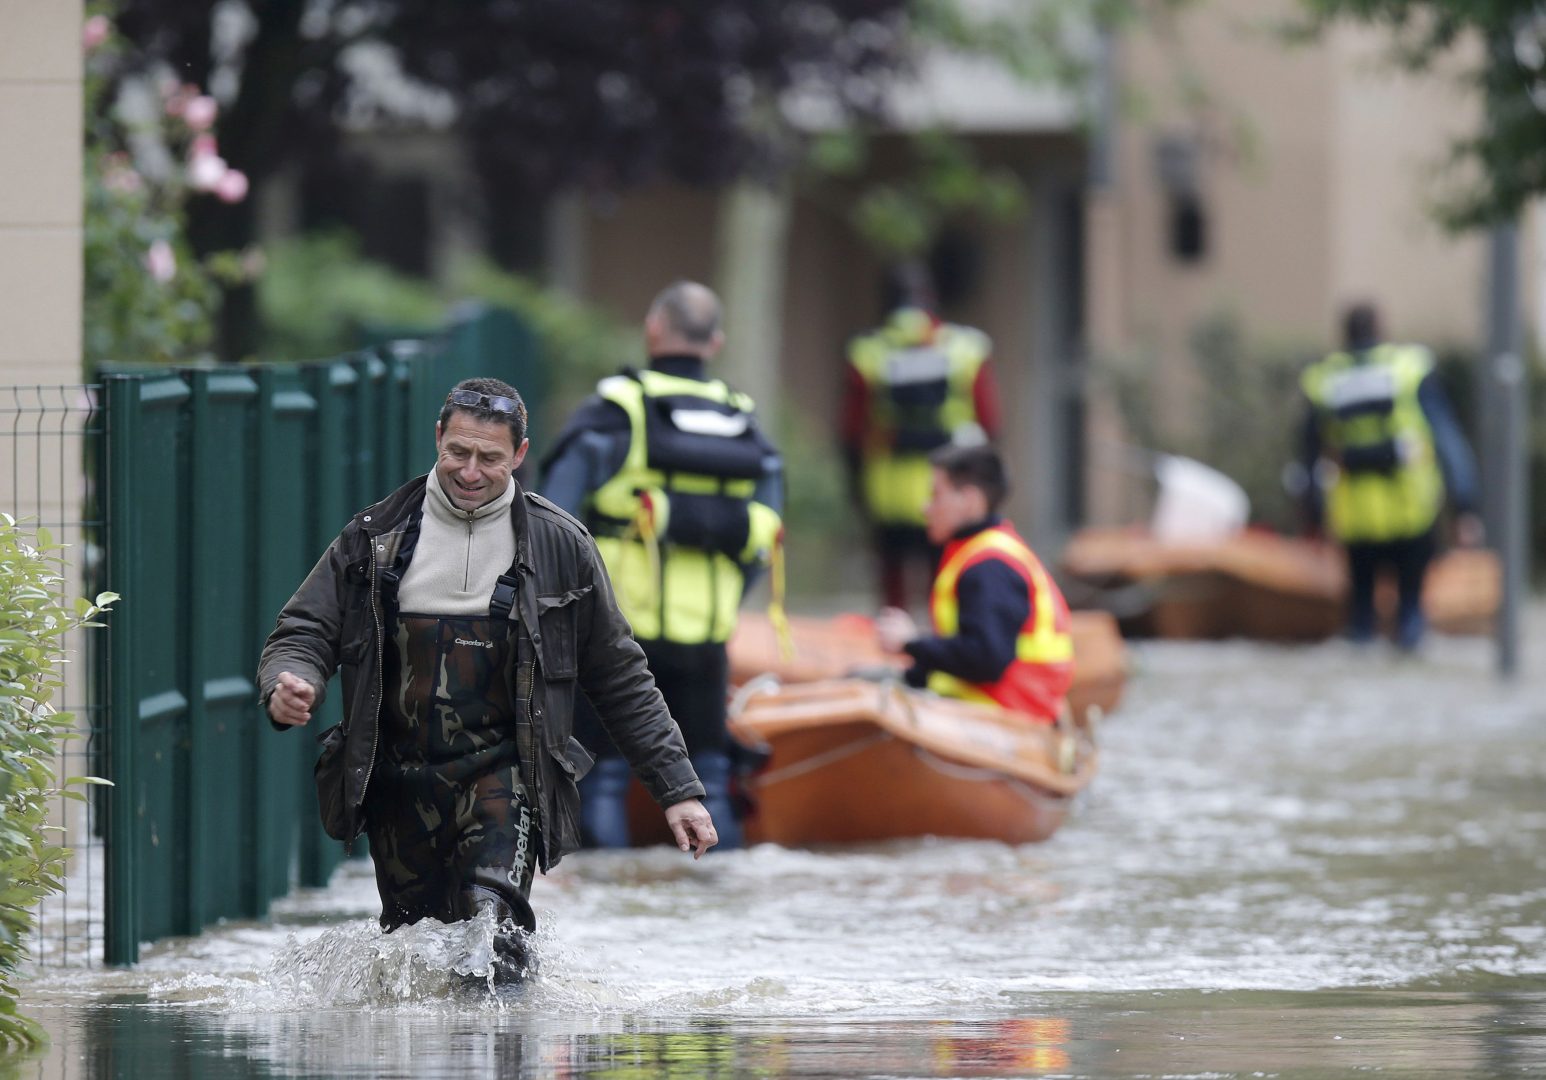 A man walks through a flooded area in Longjumeau, southern Paris, after days of almost non-stop rain caused flooding in the country, June 2, 2016. REUTERS/Christian Hartmann